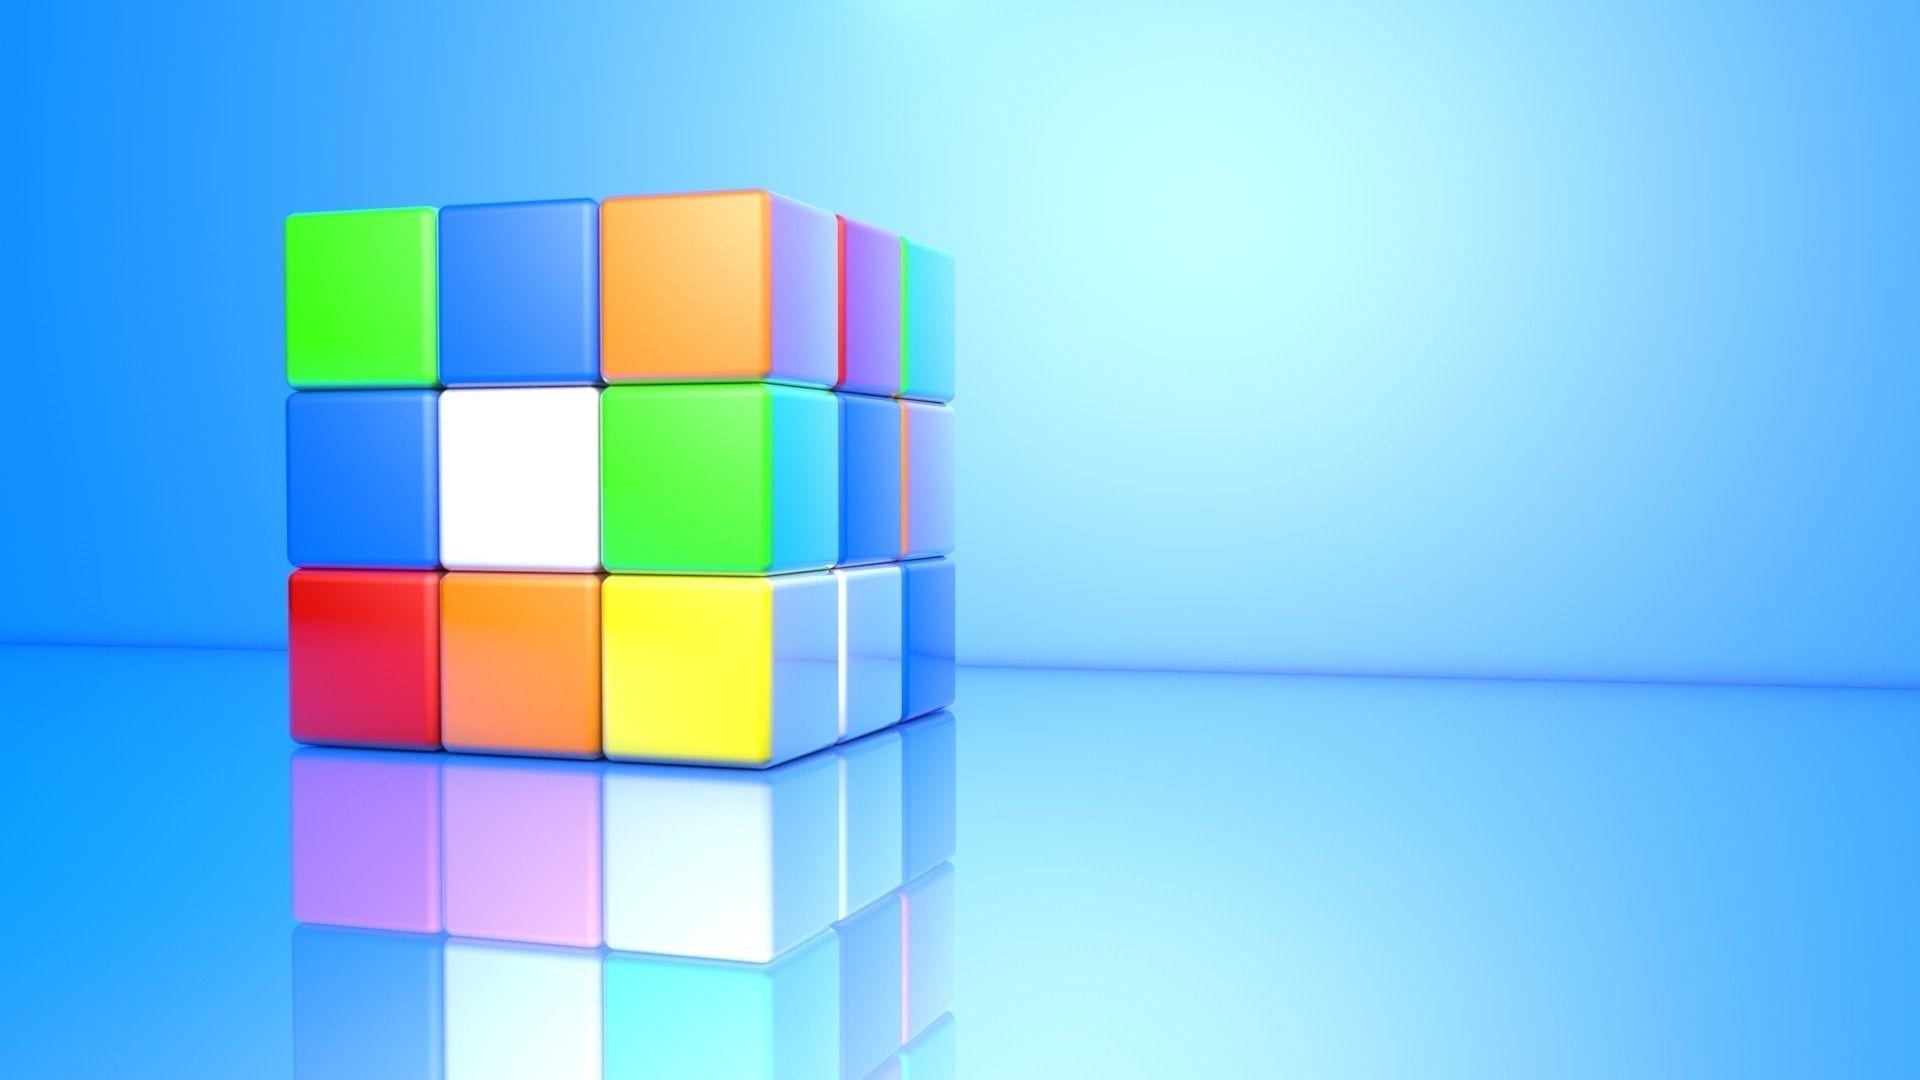 Download Wallpapers 1920x1080 Rubiks cube, Colorful, Face, Cube Full